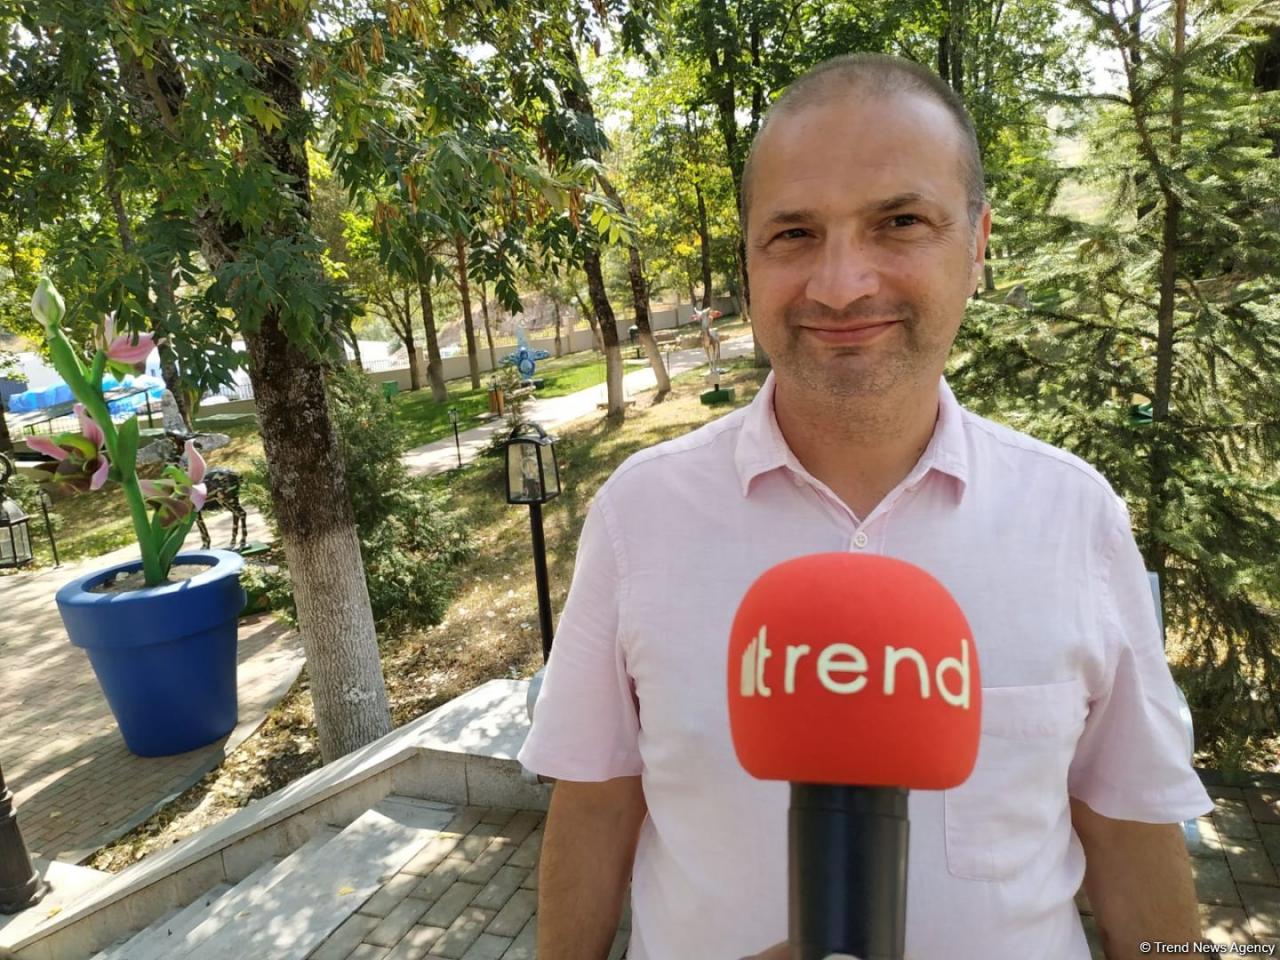 Level of destruction in Azerbaijani liberated territories is shocking - Hungarian journalist